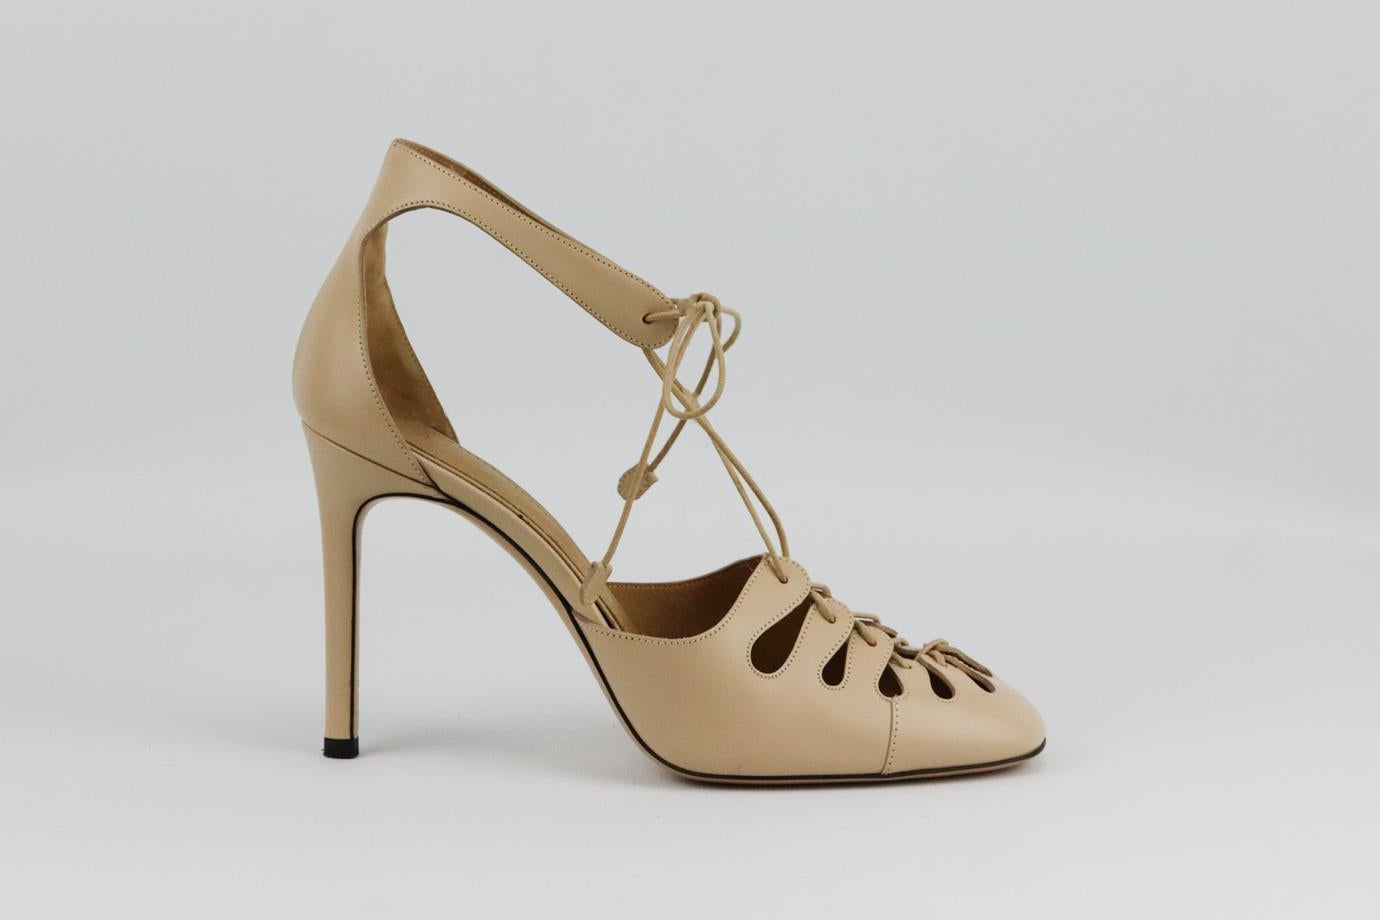 The Row lace up leather pumps. Light-beige. Lace up fastening at front. Does not come with box or dustbag. Size: EU 38.5 (UK 5.5, US 8.5). Insole: 10 in. Heel: 3.5 in
